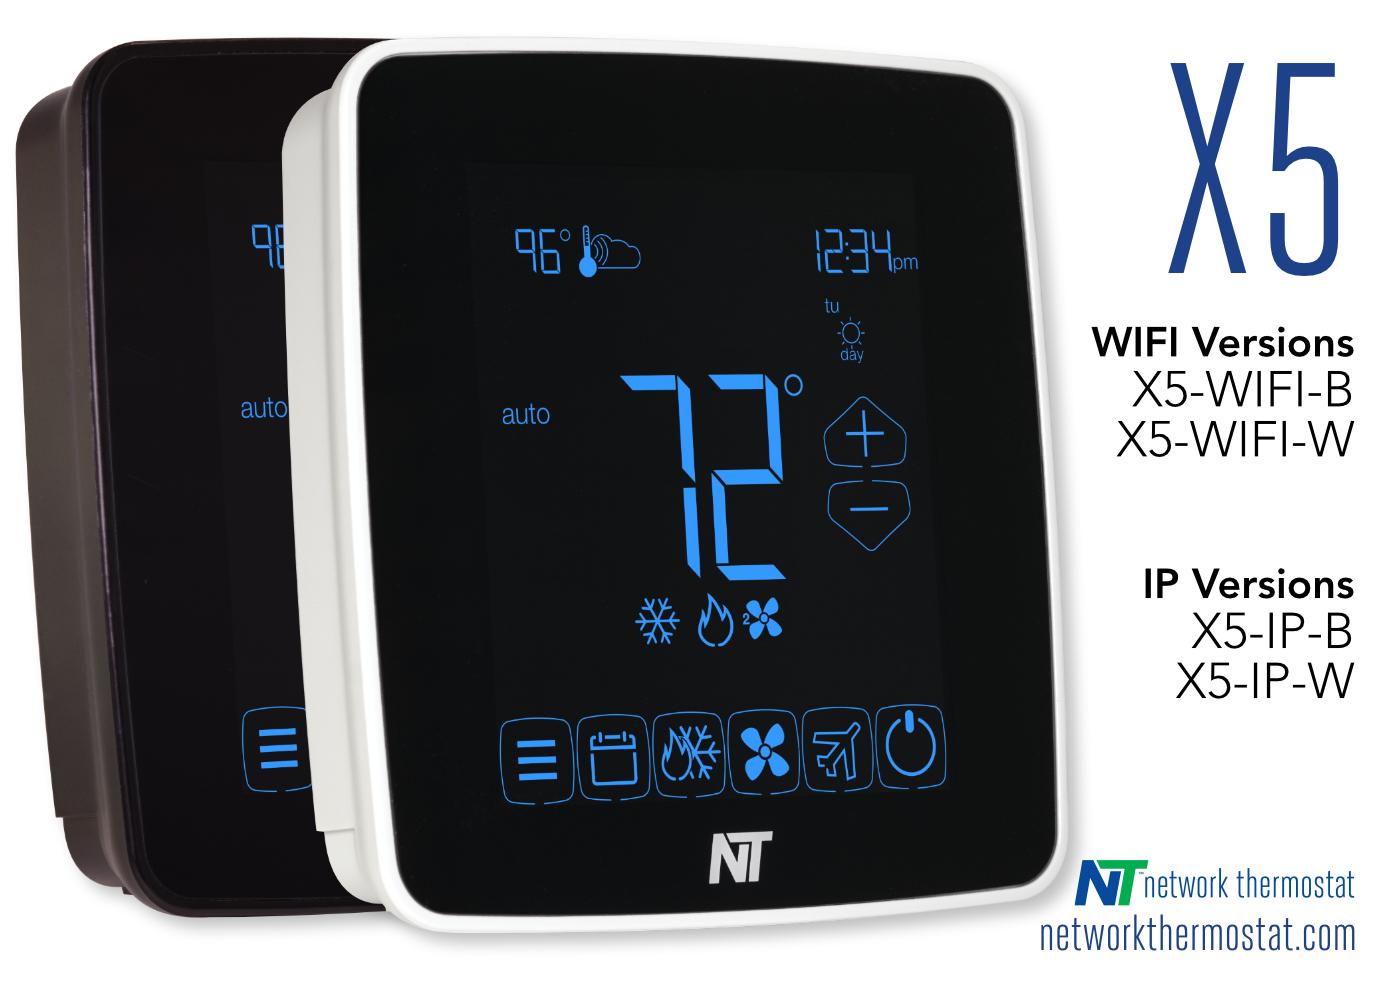 Network Thermostat Introduces NetX X5 Thermostat